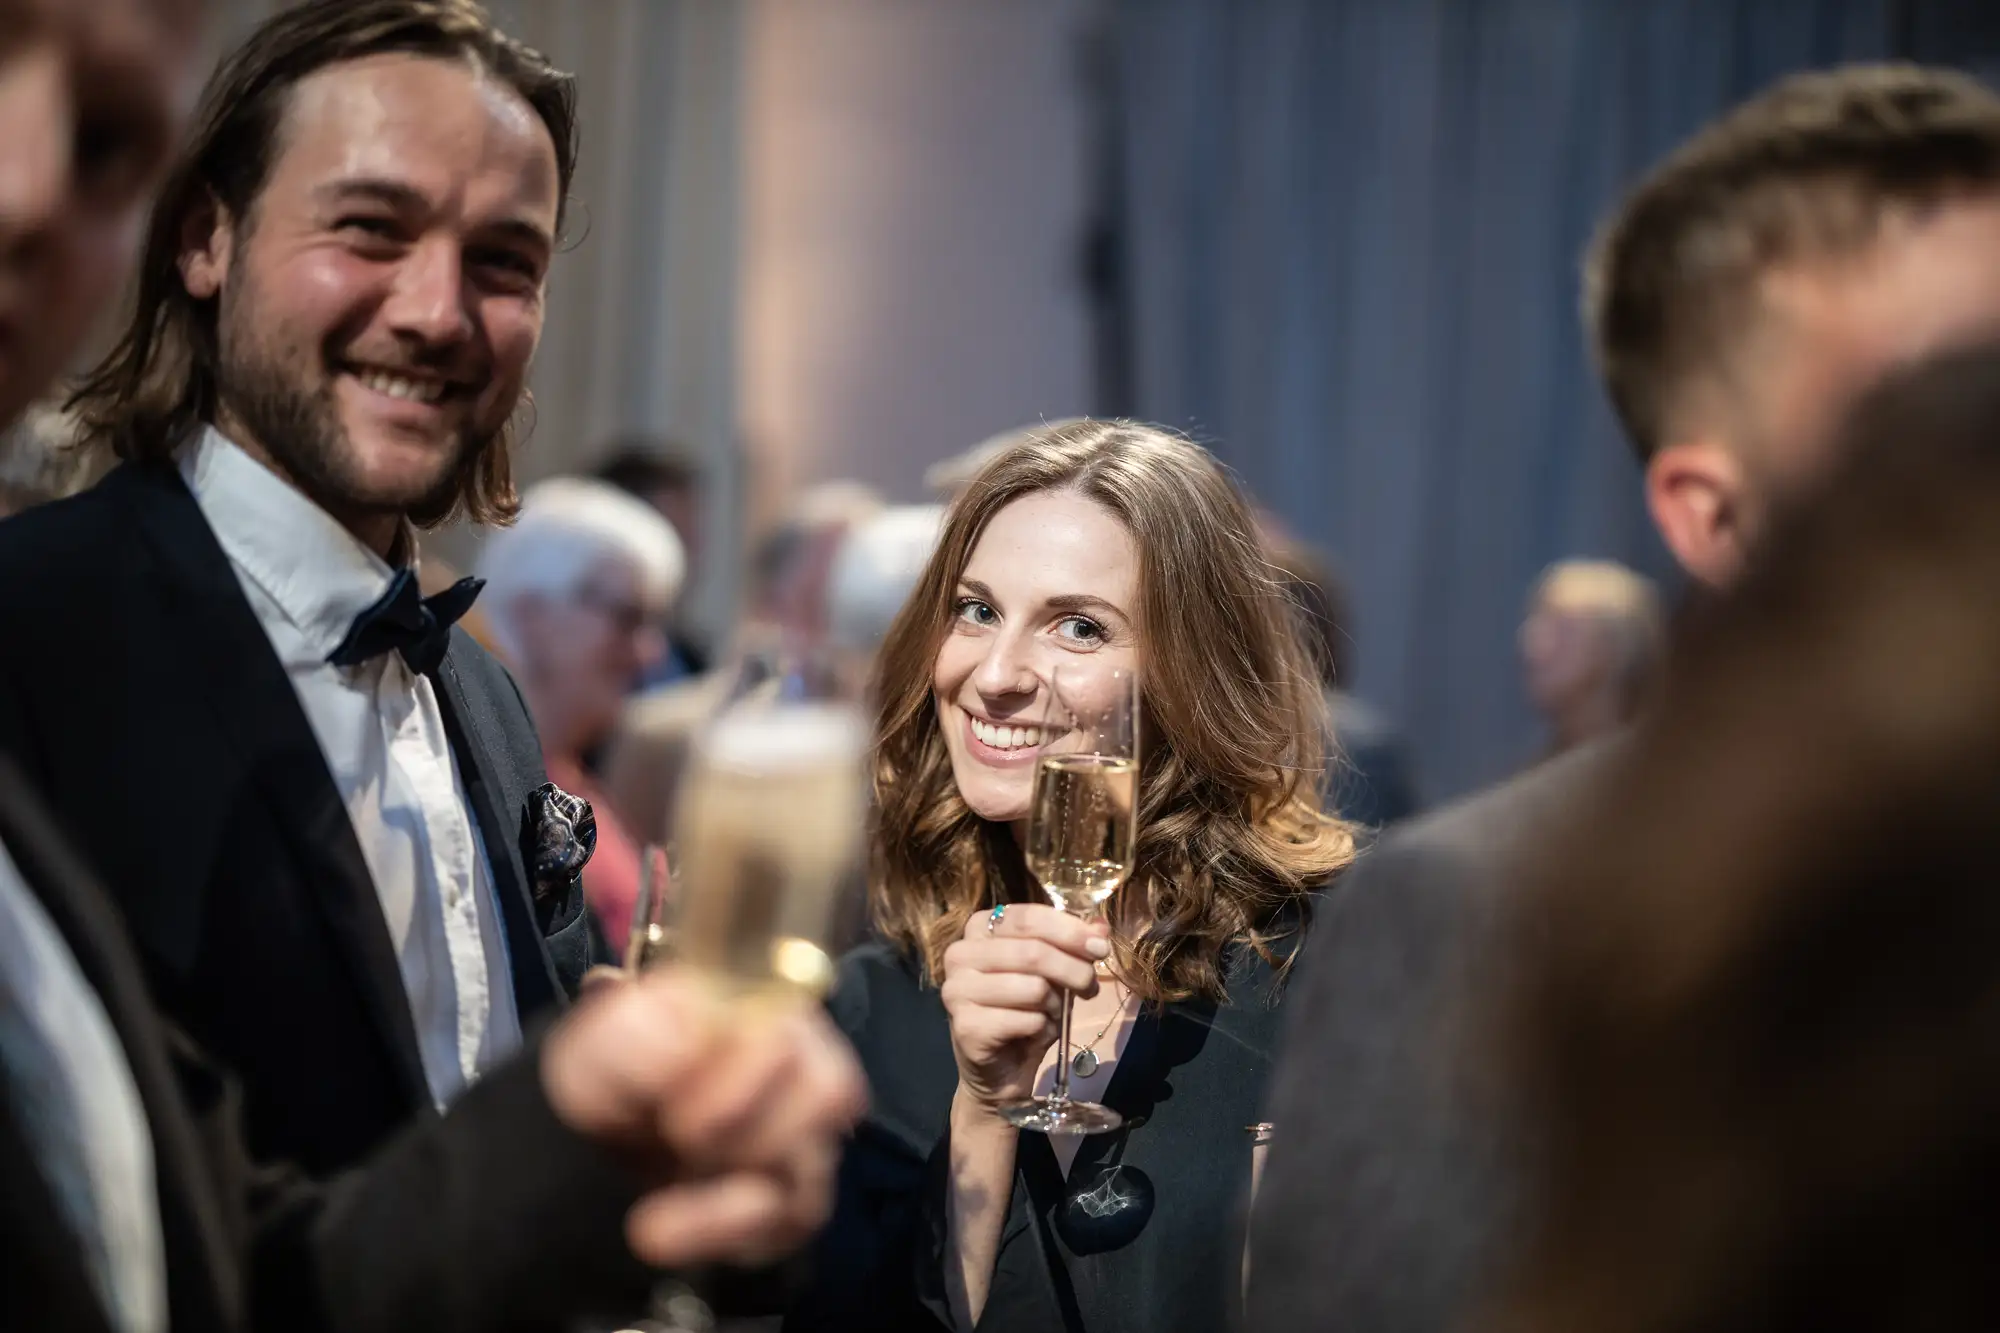 A woman smiling and holding a champagne glass at a social event, surrounded by people in formal attire.